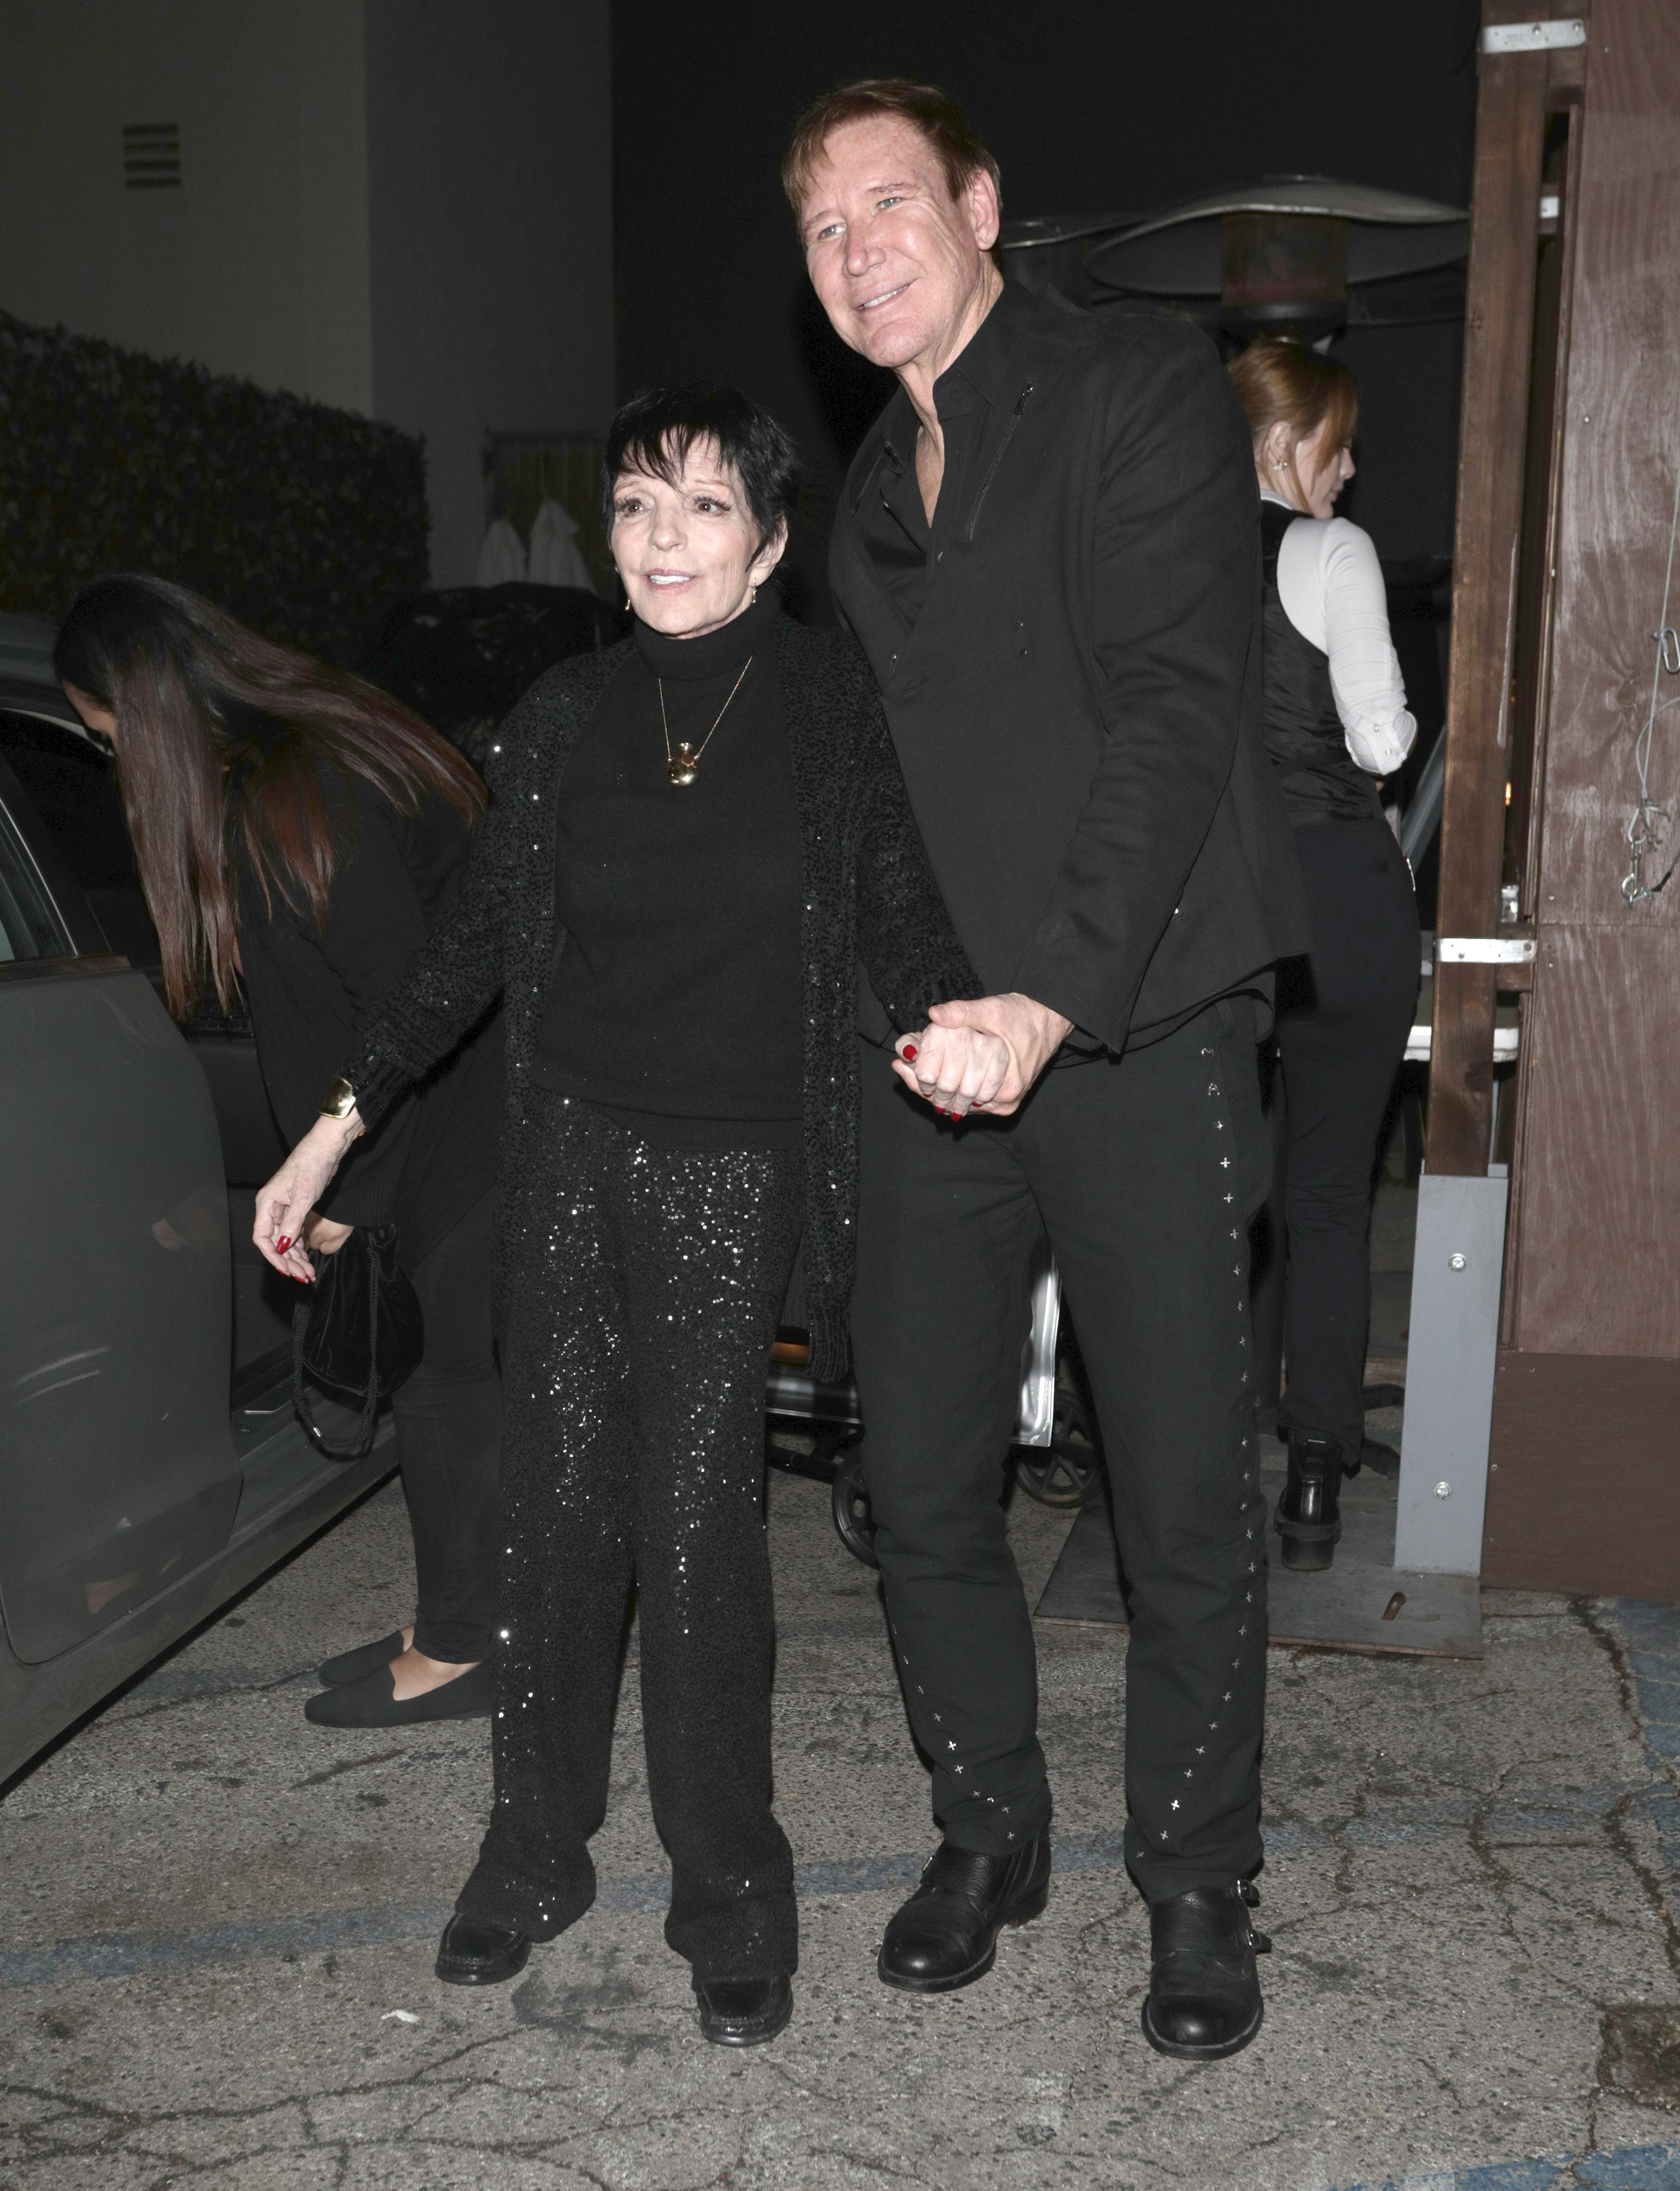 Liza Minnelli stands with assistance from a friend on December 5, 2022, in Los Angeles, California. | Source: Getty Images